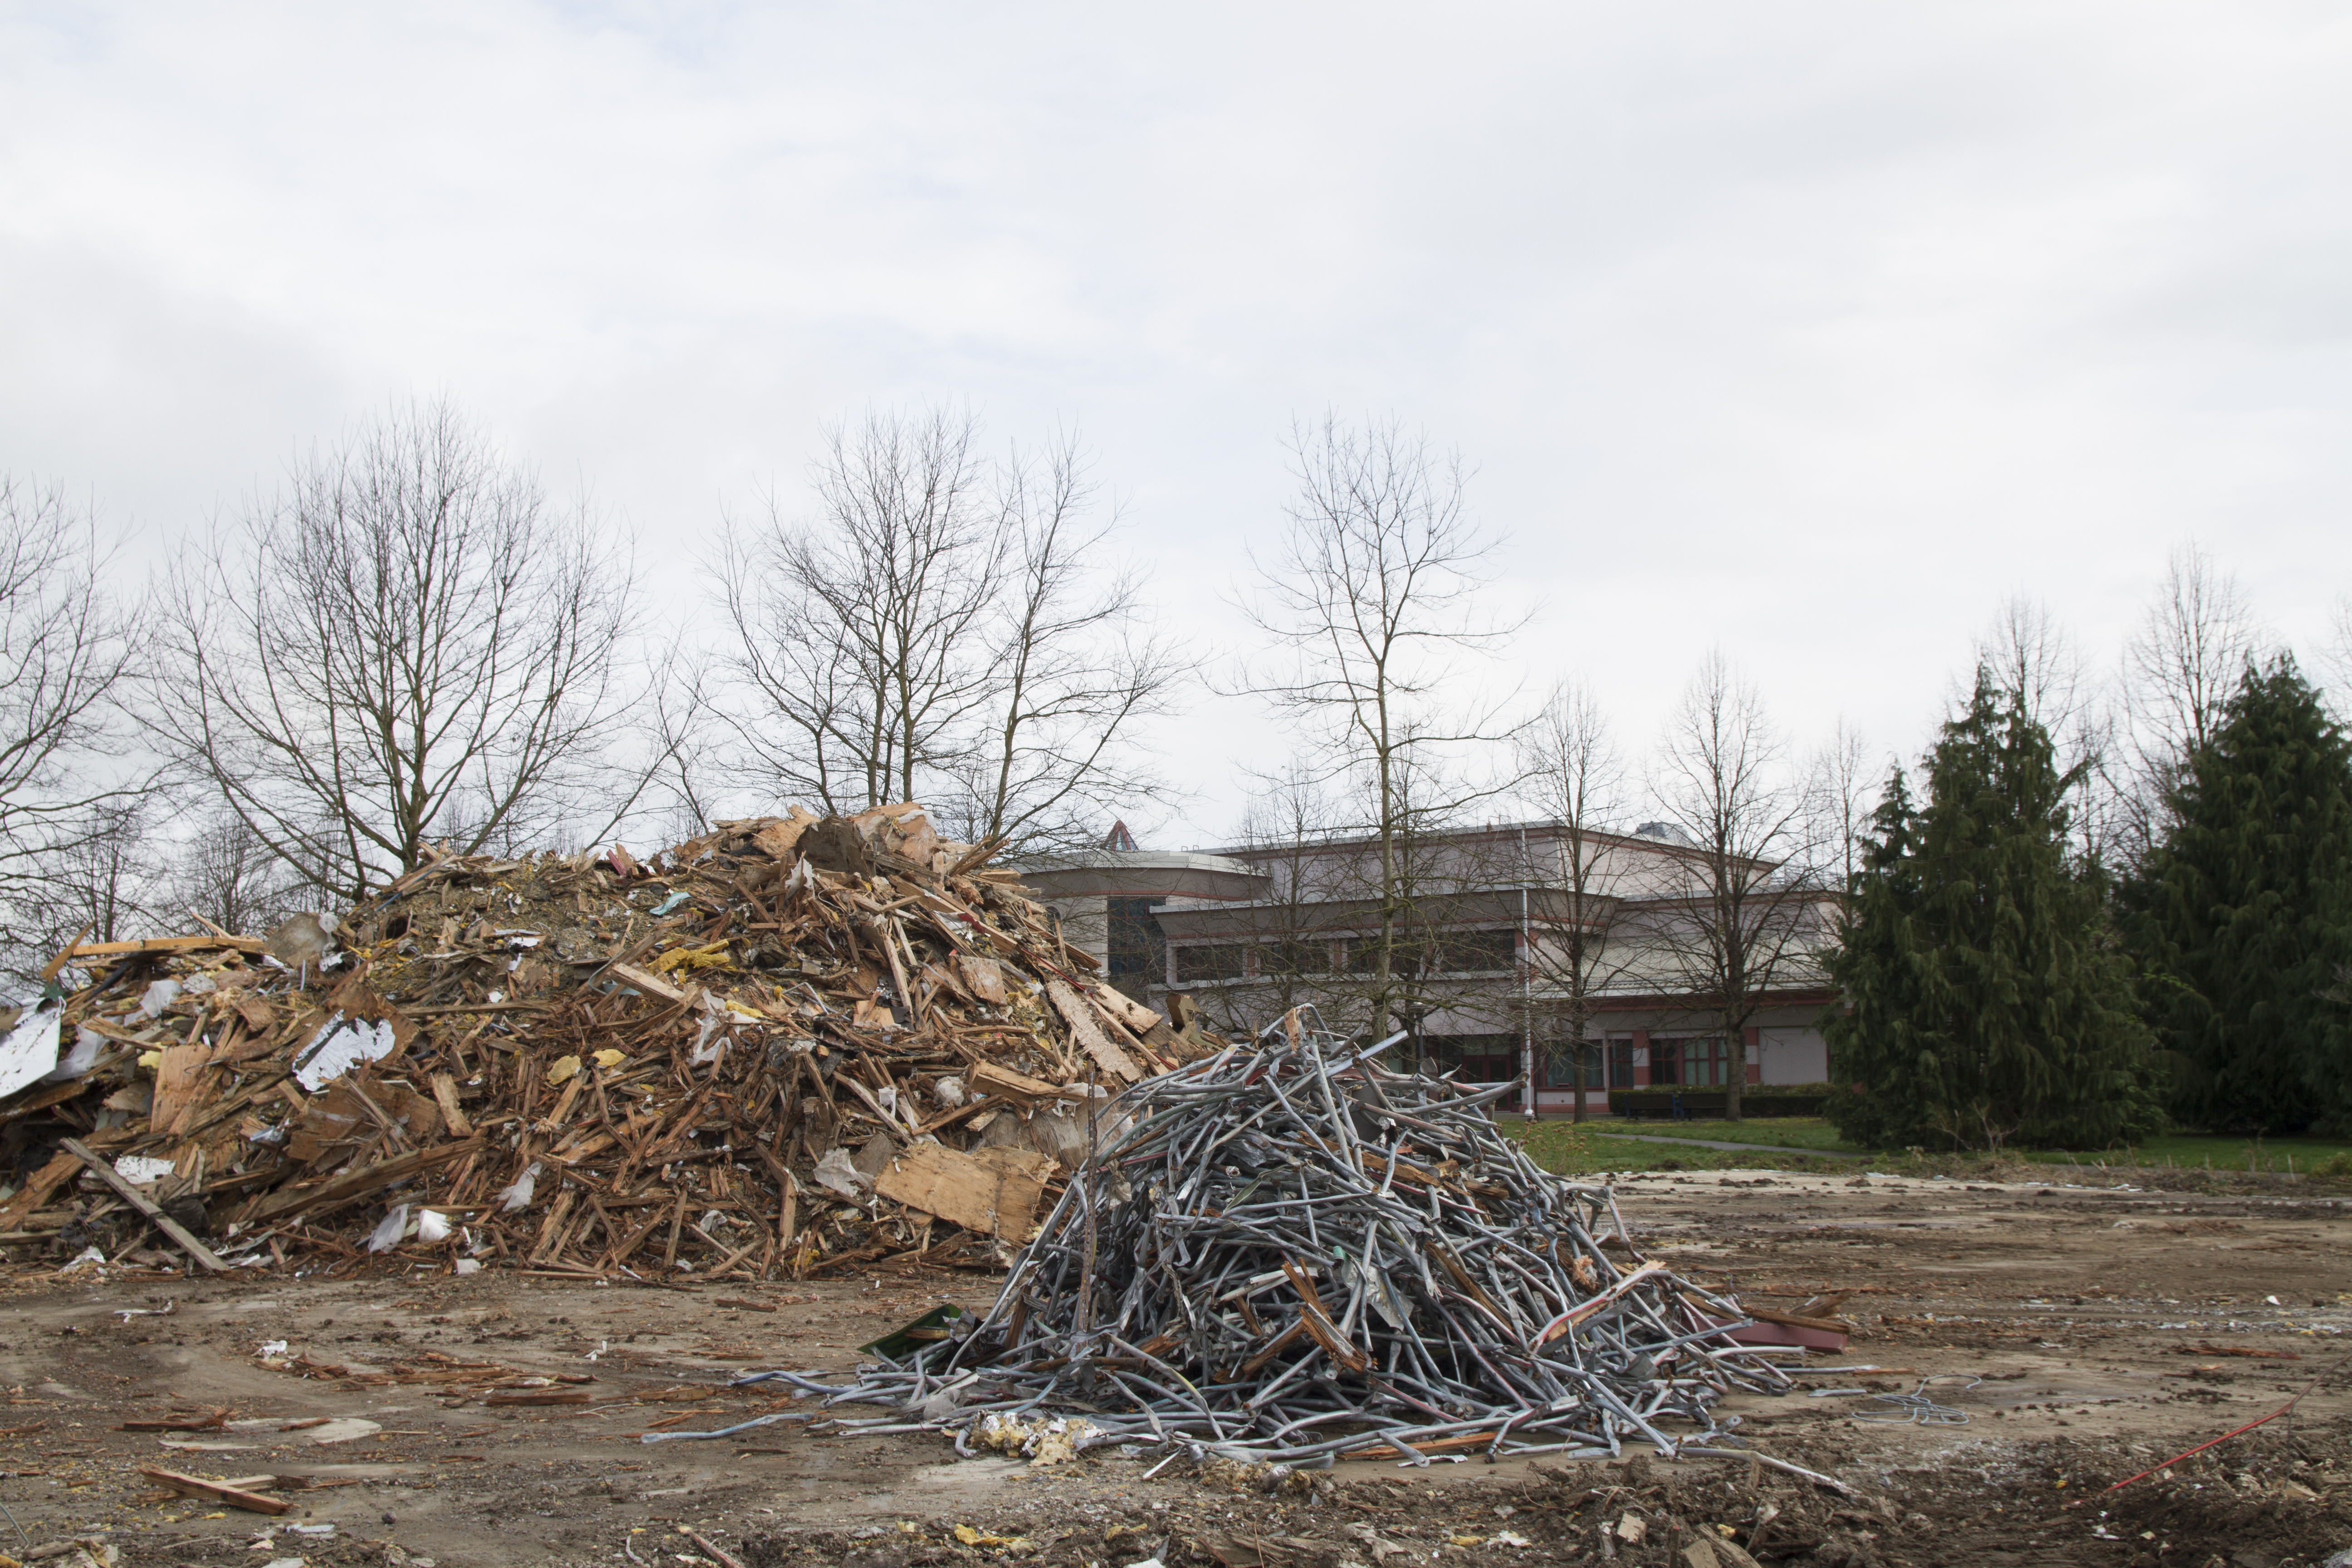 With theatre department last remaining resident, demolition at Chilliwack North begins